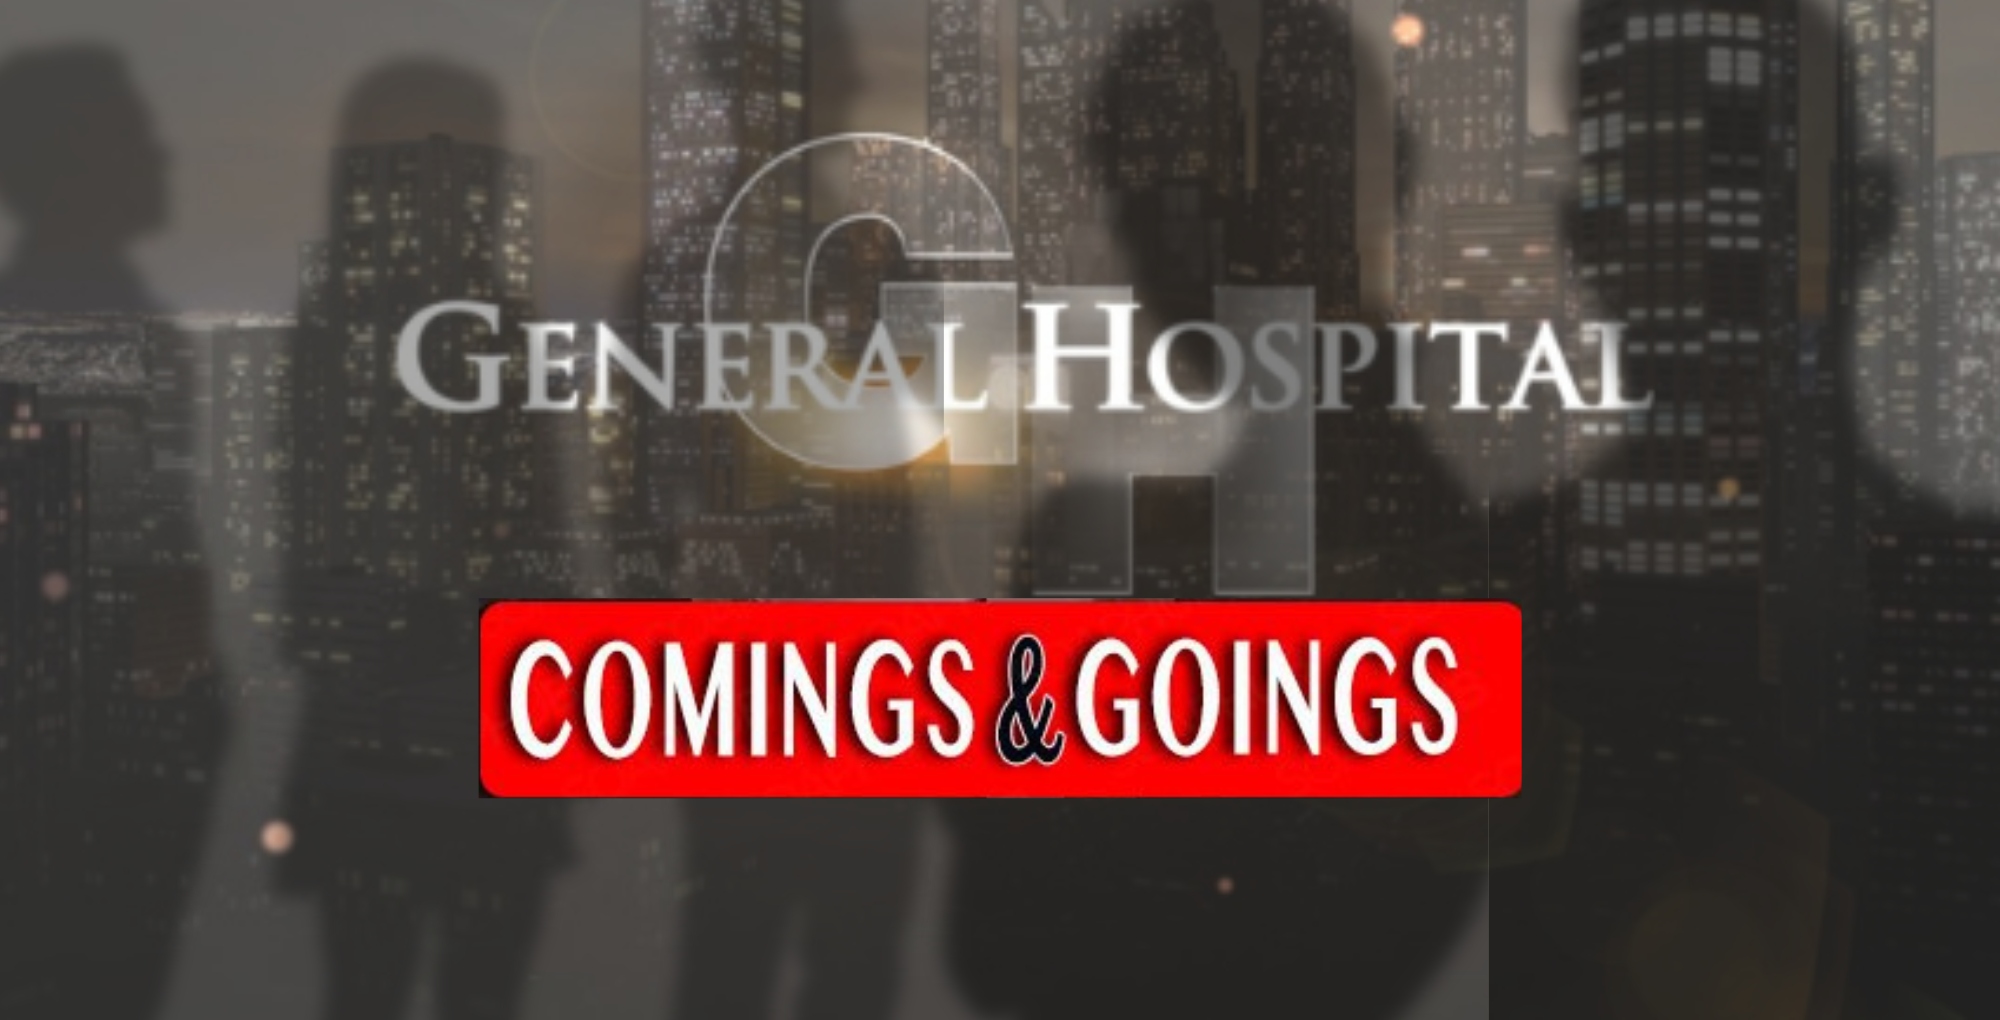 General Hospital Comings and Goings graphic logo